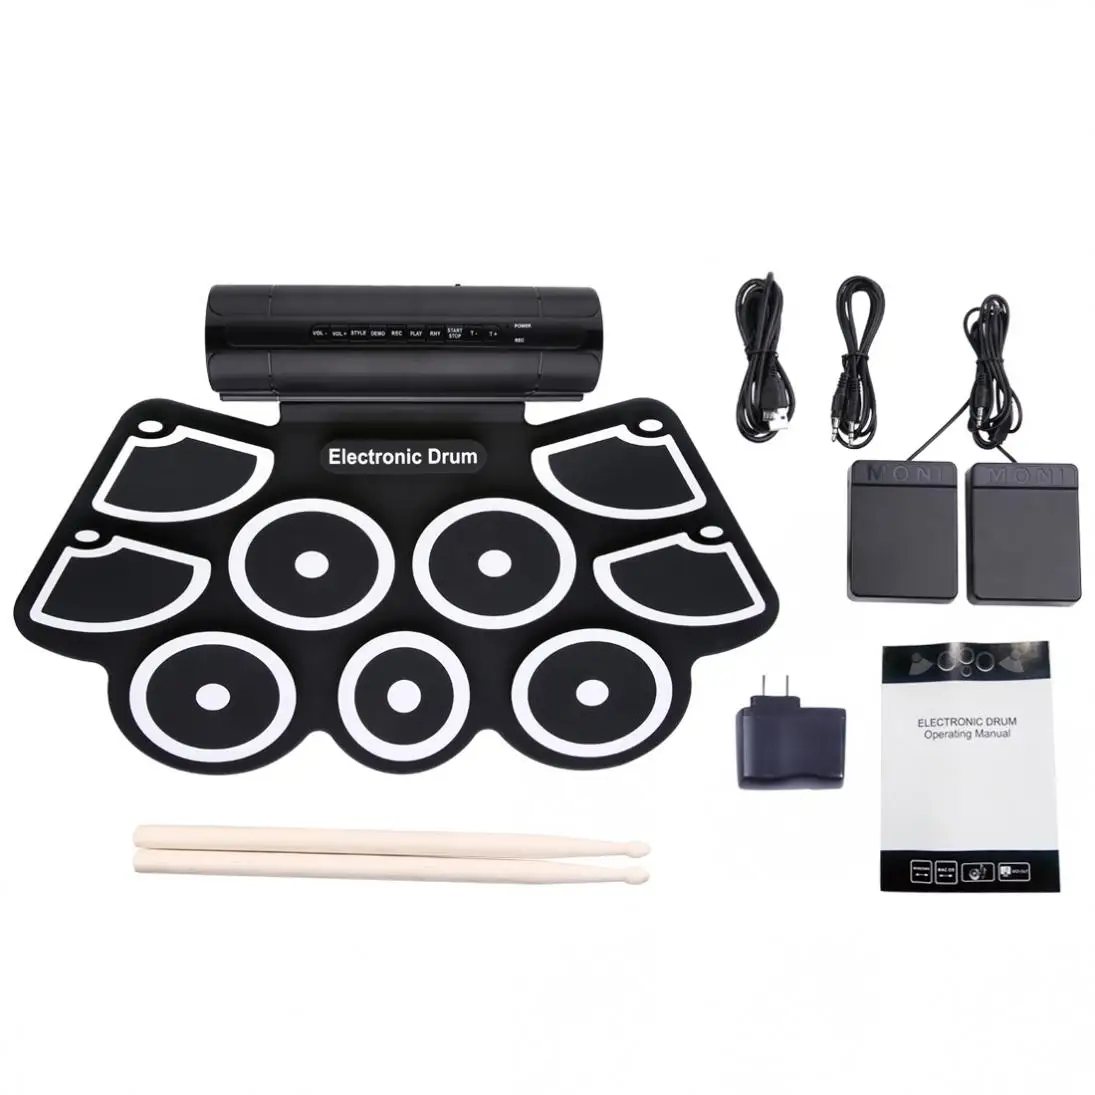 Enlarge Portable Roll Up Electronic Drum Set 9 Silicon Pads Built-in Speakers with Drumsticks Foot Pedals Support USB